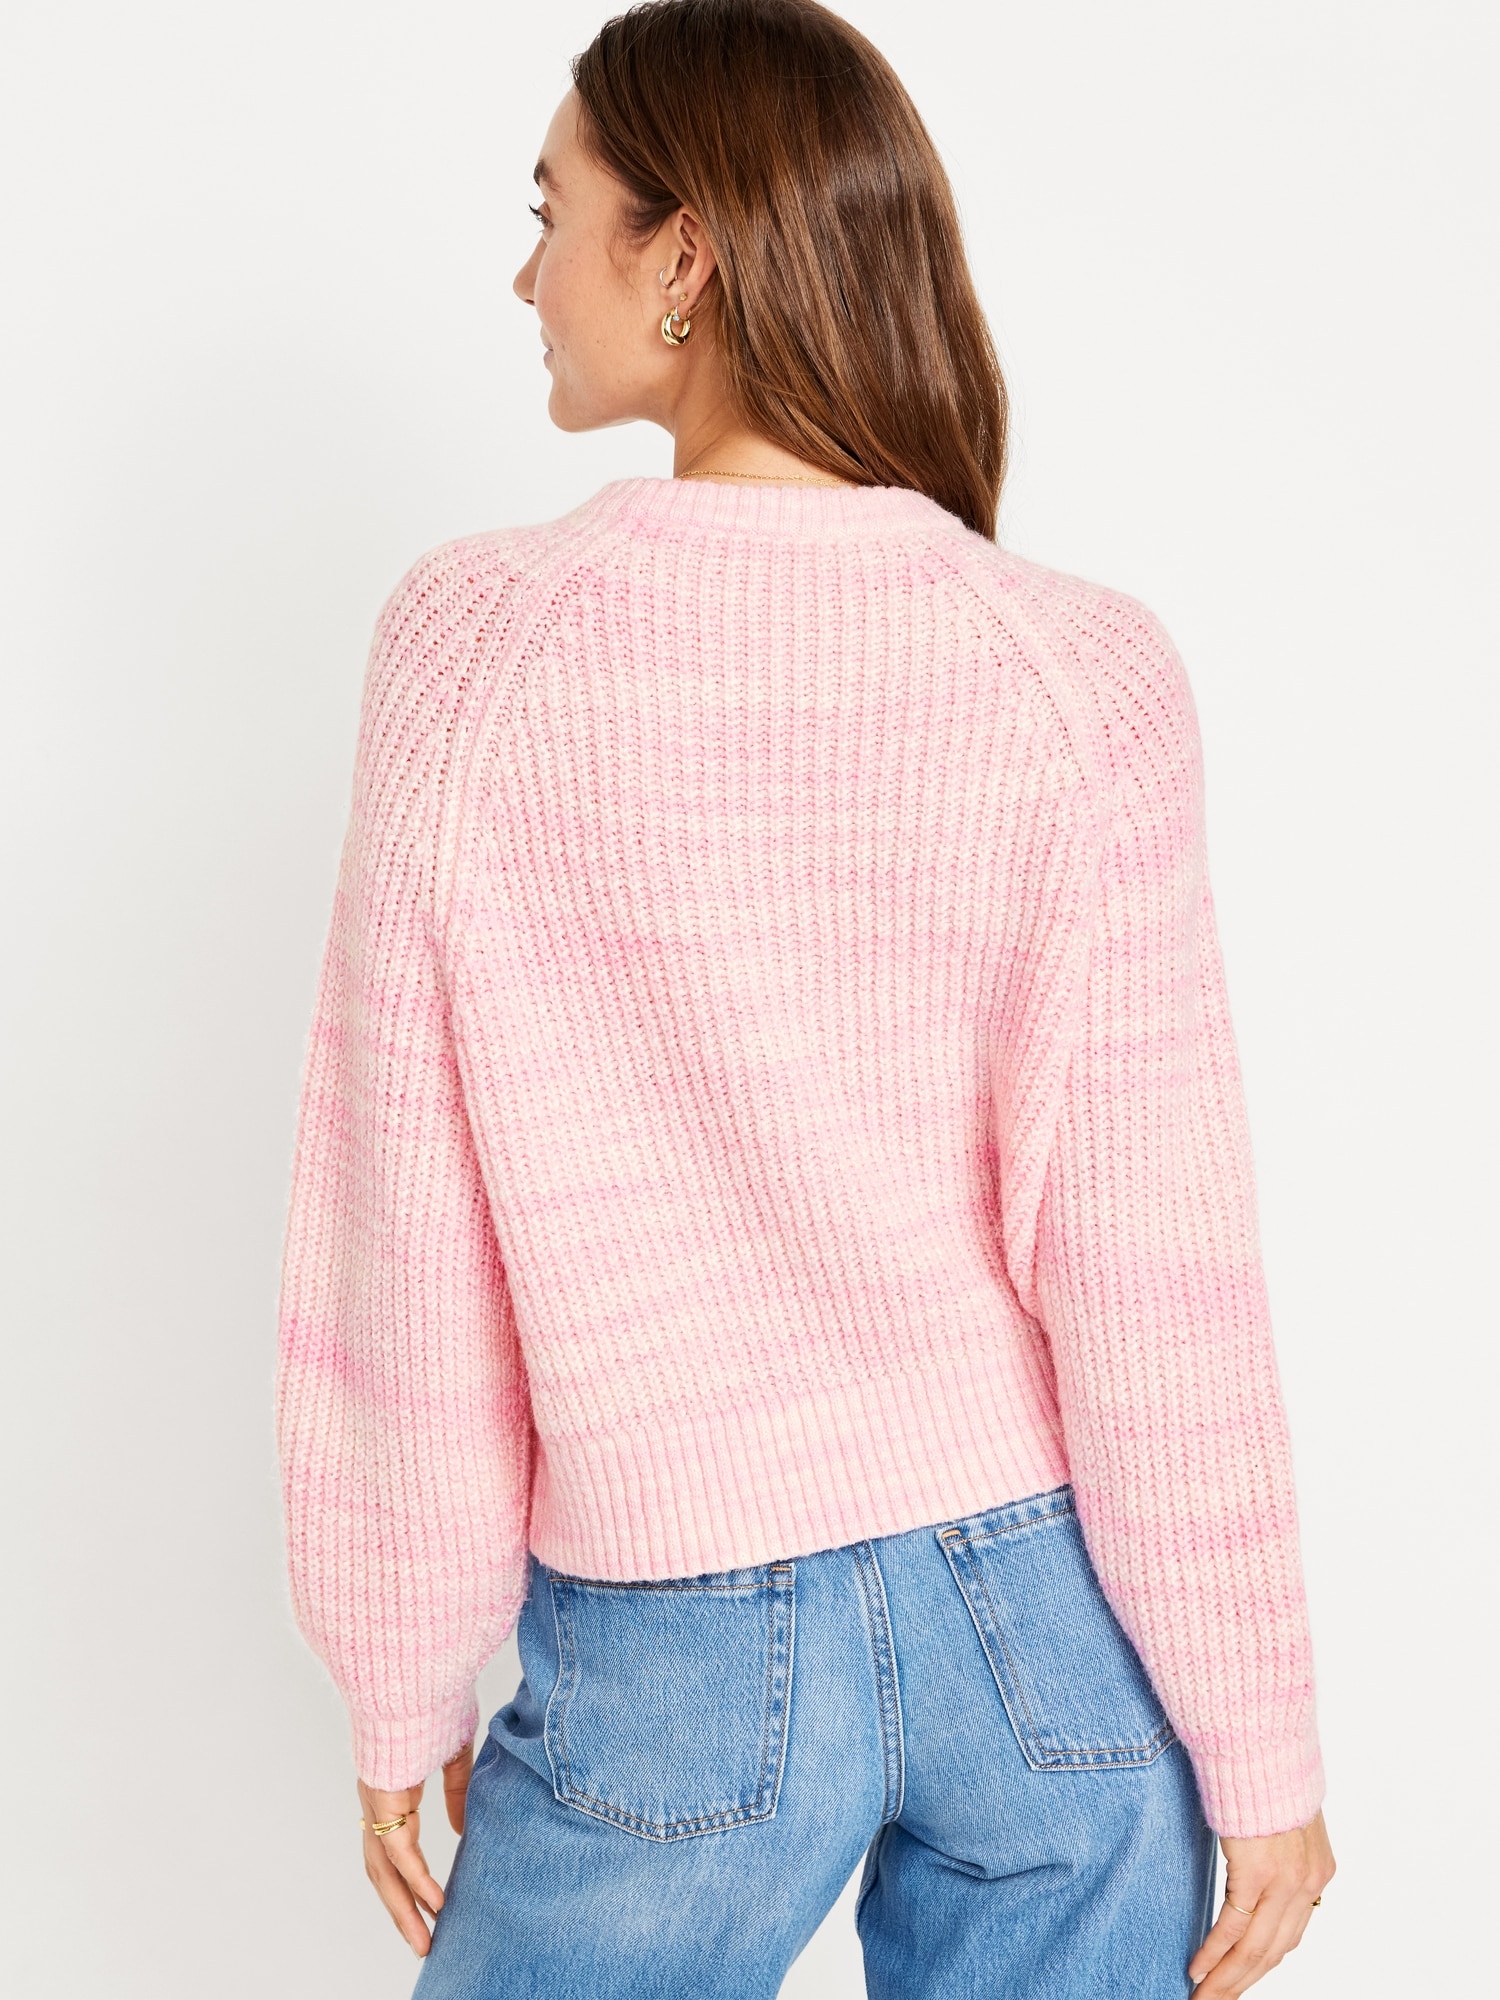 Cropped Crew-Neck Sweater | Old Navy